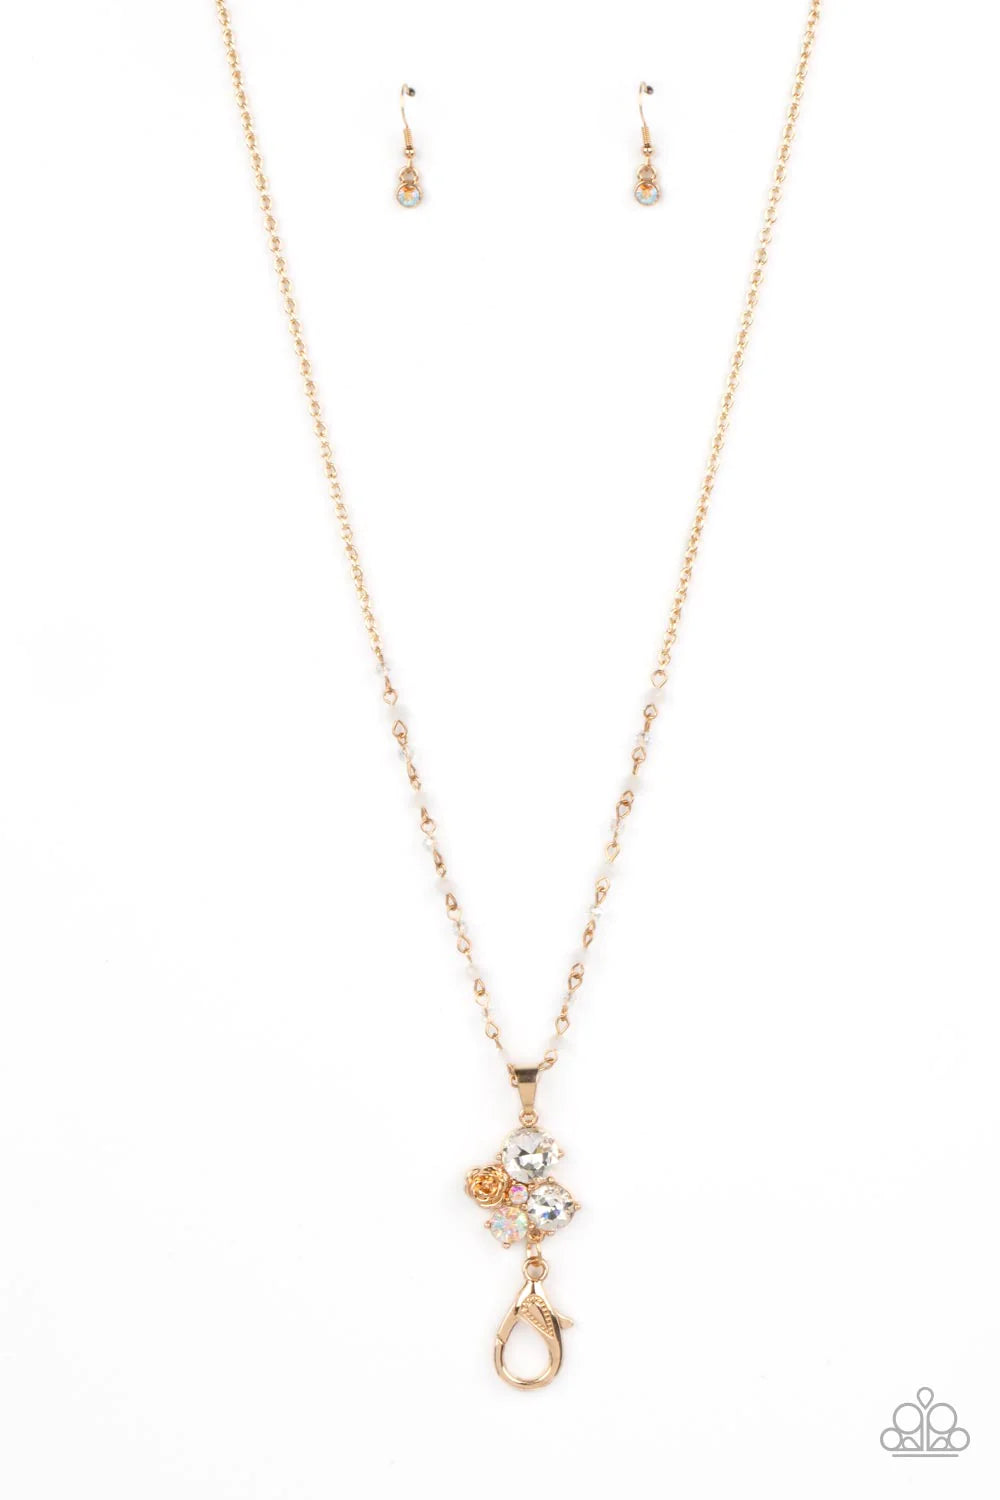 Paparazzi Accessories Rainbow Bloom - Gold *Lanyard Varying in size and shimmer, rhinestones brushed in an iridescent shimmer and glittery white rhinestones coalesce into a clustered pendant at the bottom of a shimmery gold chain. A metallic gold rose blo